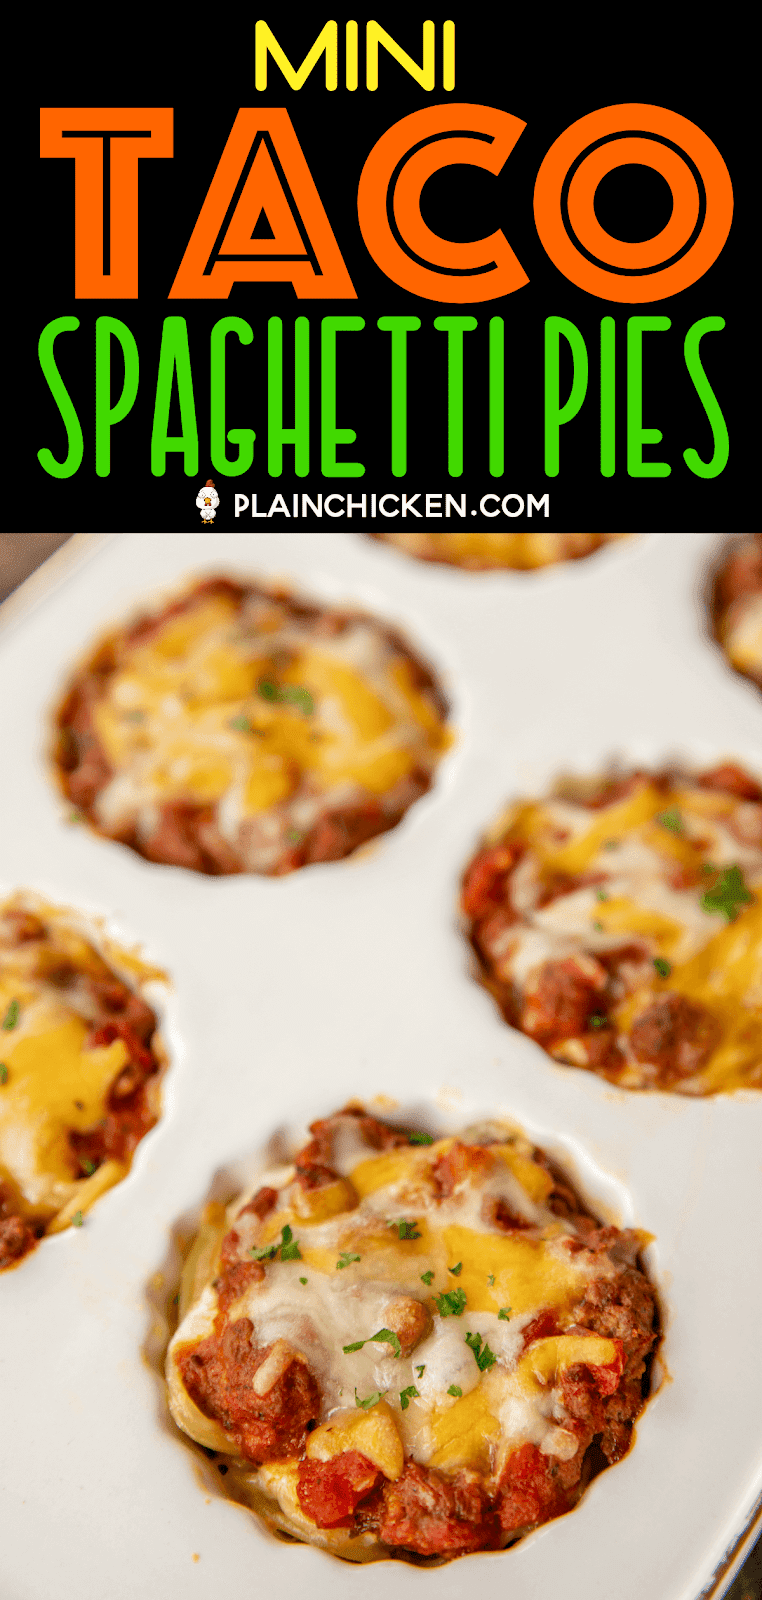 Mini Taco Spaghetti Pies - two favorites combined into one delicious dish!!! Bake in a muffin pan for a fun meal! Spaghetti, eggs, parmesan cheese, ground beef, taco seasoning, Rotel diced tomatoes and green chiles, spaghetti sauce, cottage cheese, butter, cheddar cheese. Can freeze leftovers for a quick meal later. Since they are small, they reheat in a flash! Our new favorite way to eat tacos and spaghetti! #tacos #spaghetti #freezermeal #recipe #spaghettipie #pasta